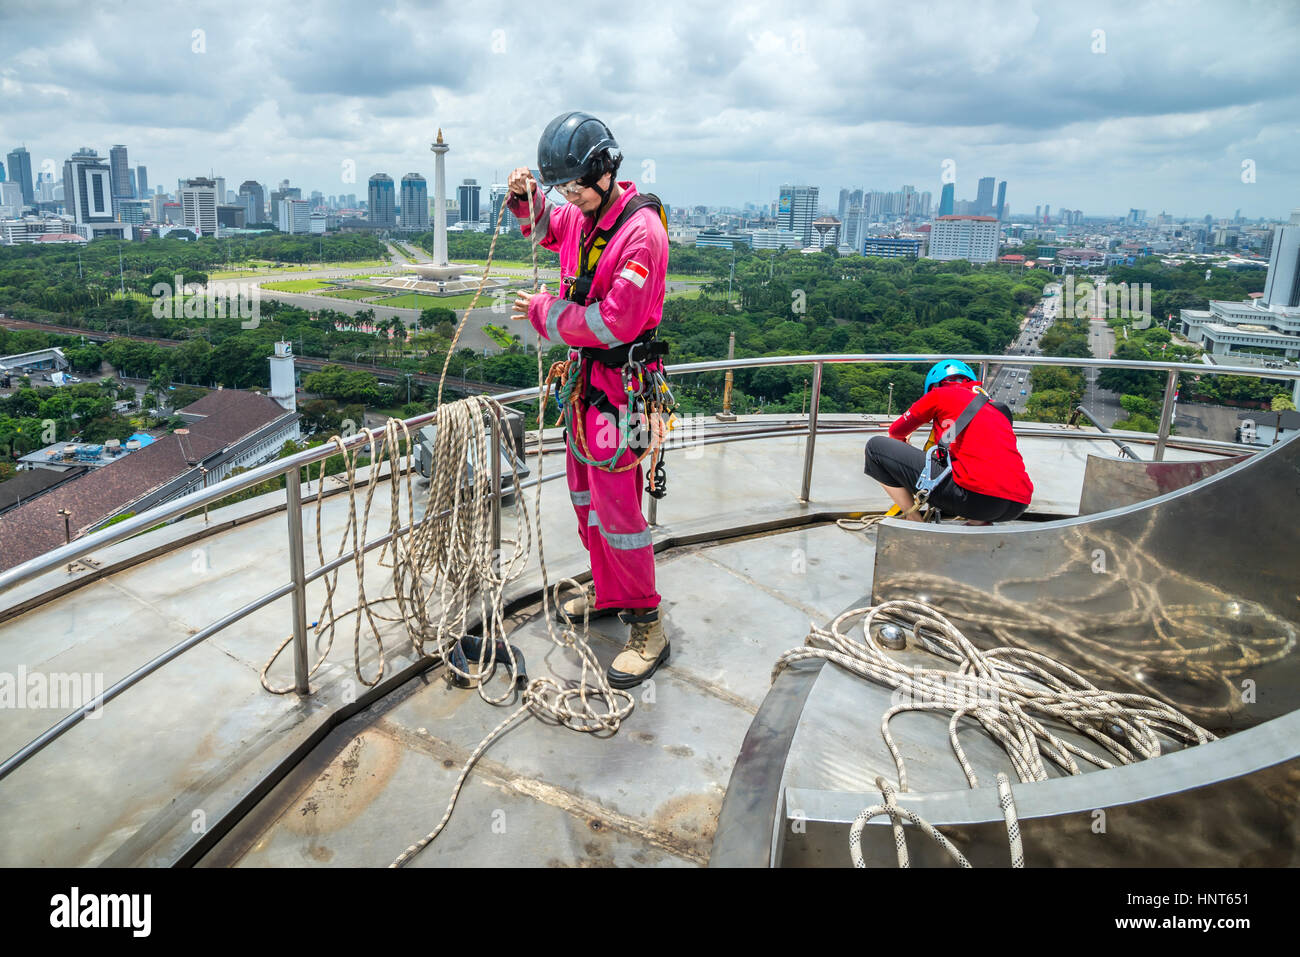 Jakarta, Indonesia. 17th February, 2017. Voluntary workers coils the ropes at the hightest standing platform of the 66.66 metres-height tower of Istiqlal Mosque in Jakarta, Indonesia. Dozens of members of the outdoor activity enthusiasts clubs, rope access companies, and outdoor adventure service organization, gather voluntarily to clean up the largest mosque in Southeast Asia to strengthen the national unity, solidarity, and tolerance. Stock Photo